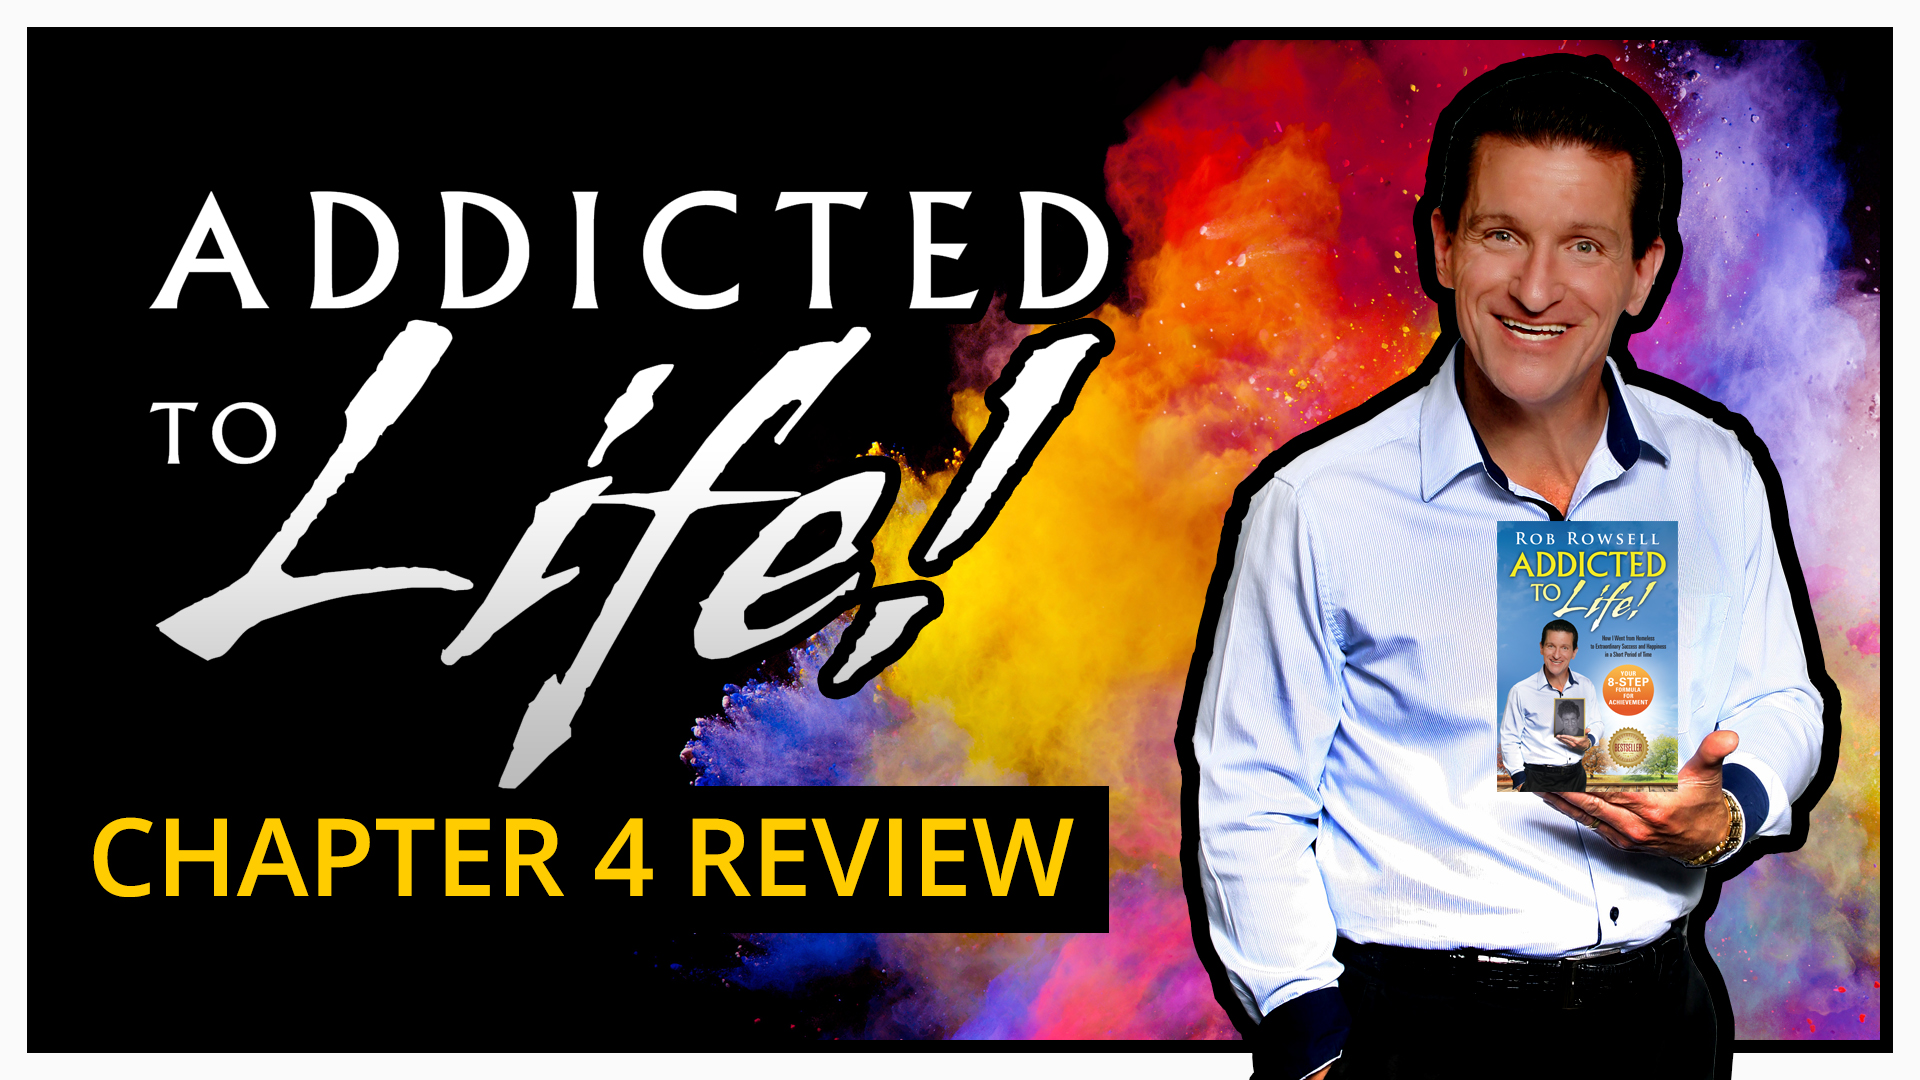 "Addicted to Life" Chapter 4 Review - You Have to Prepare NOW for What’s Coming!